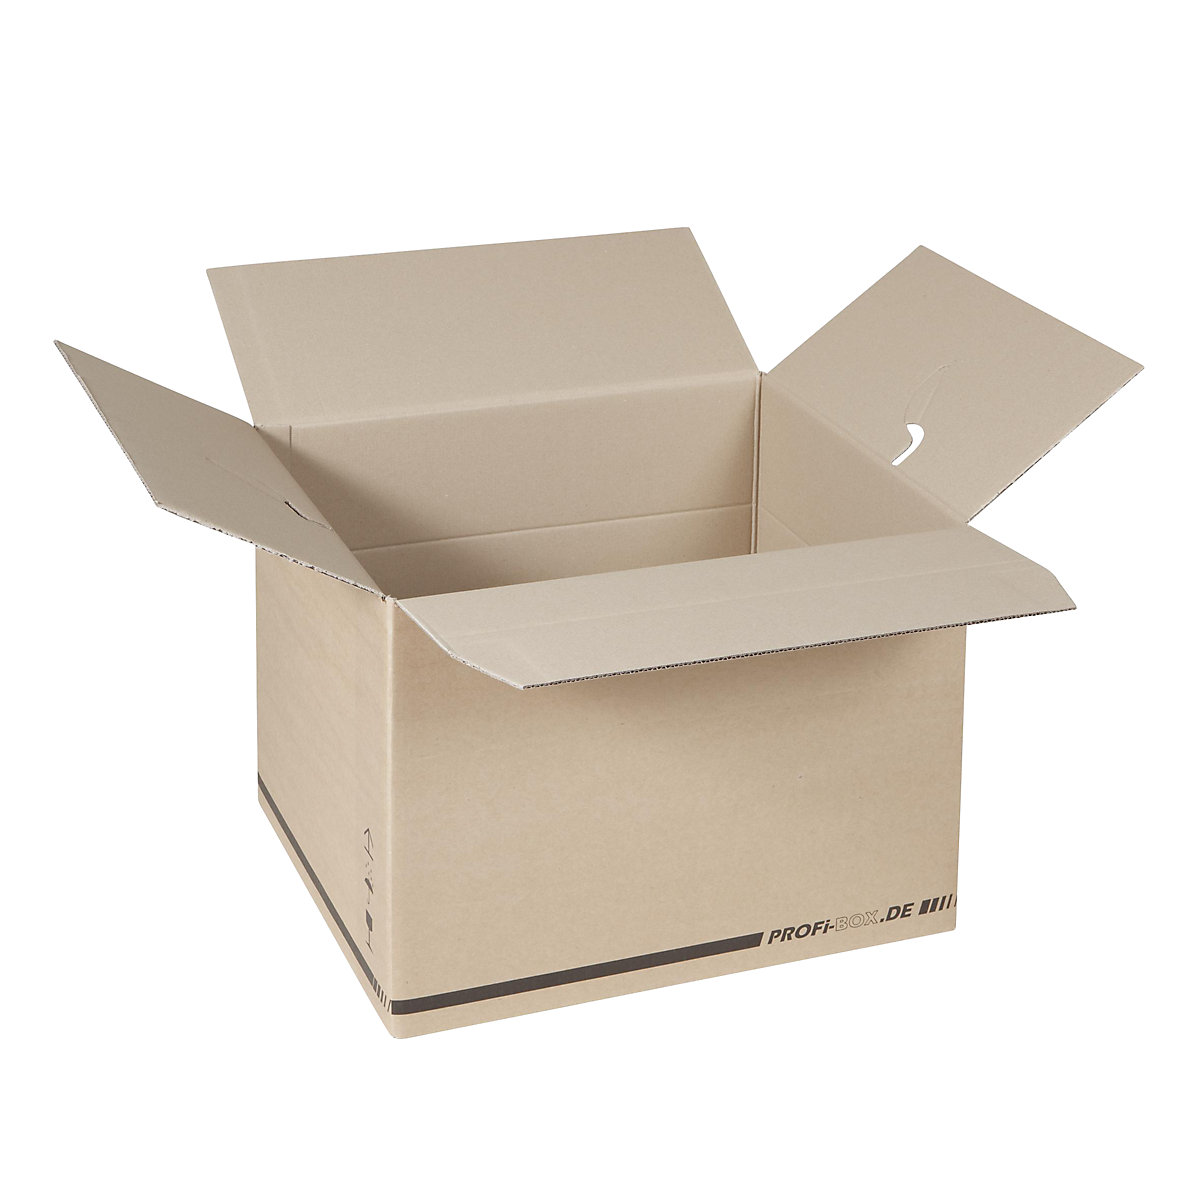 Professional boxes, made of double fluted cardboard, internal dimensions 476 x 376 x 340 mm, FEFCO 0216, pack of 50-8